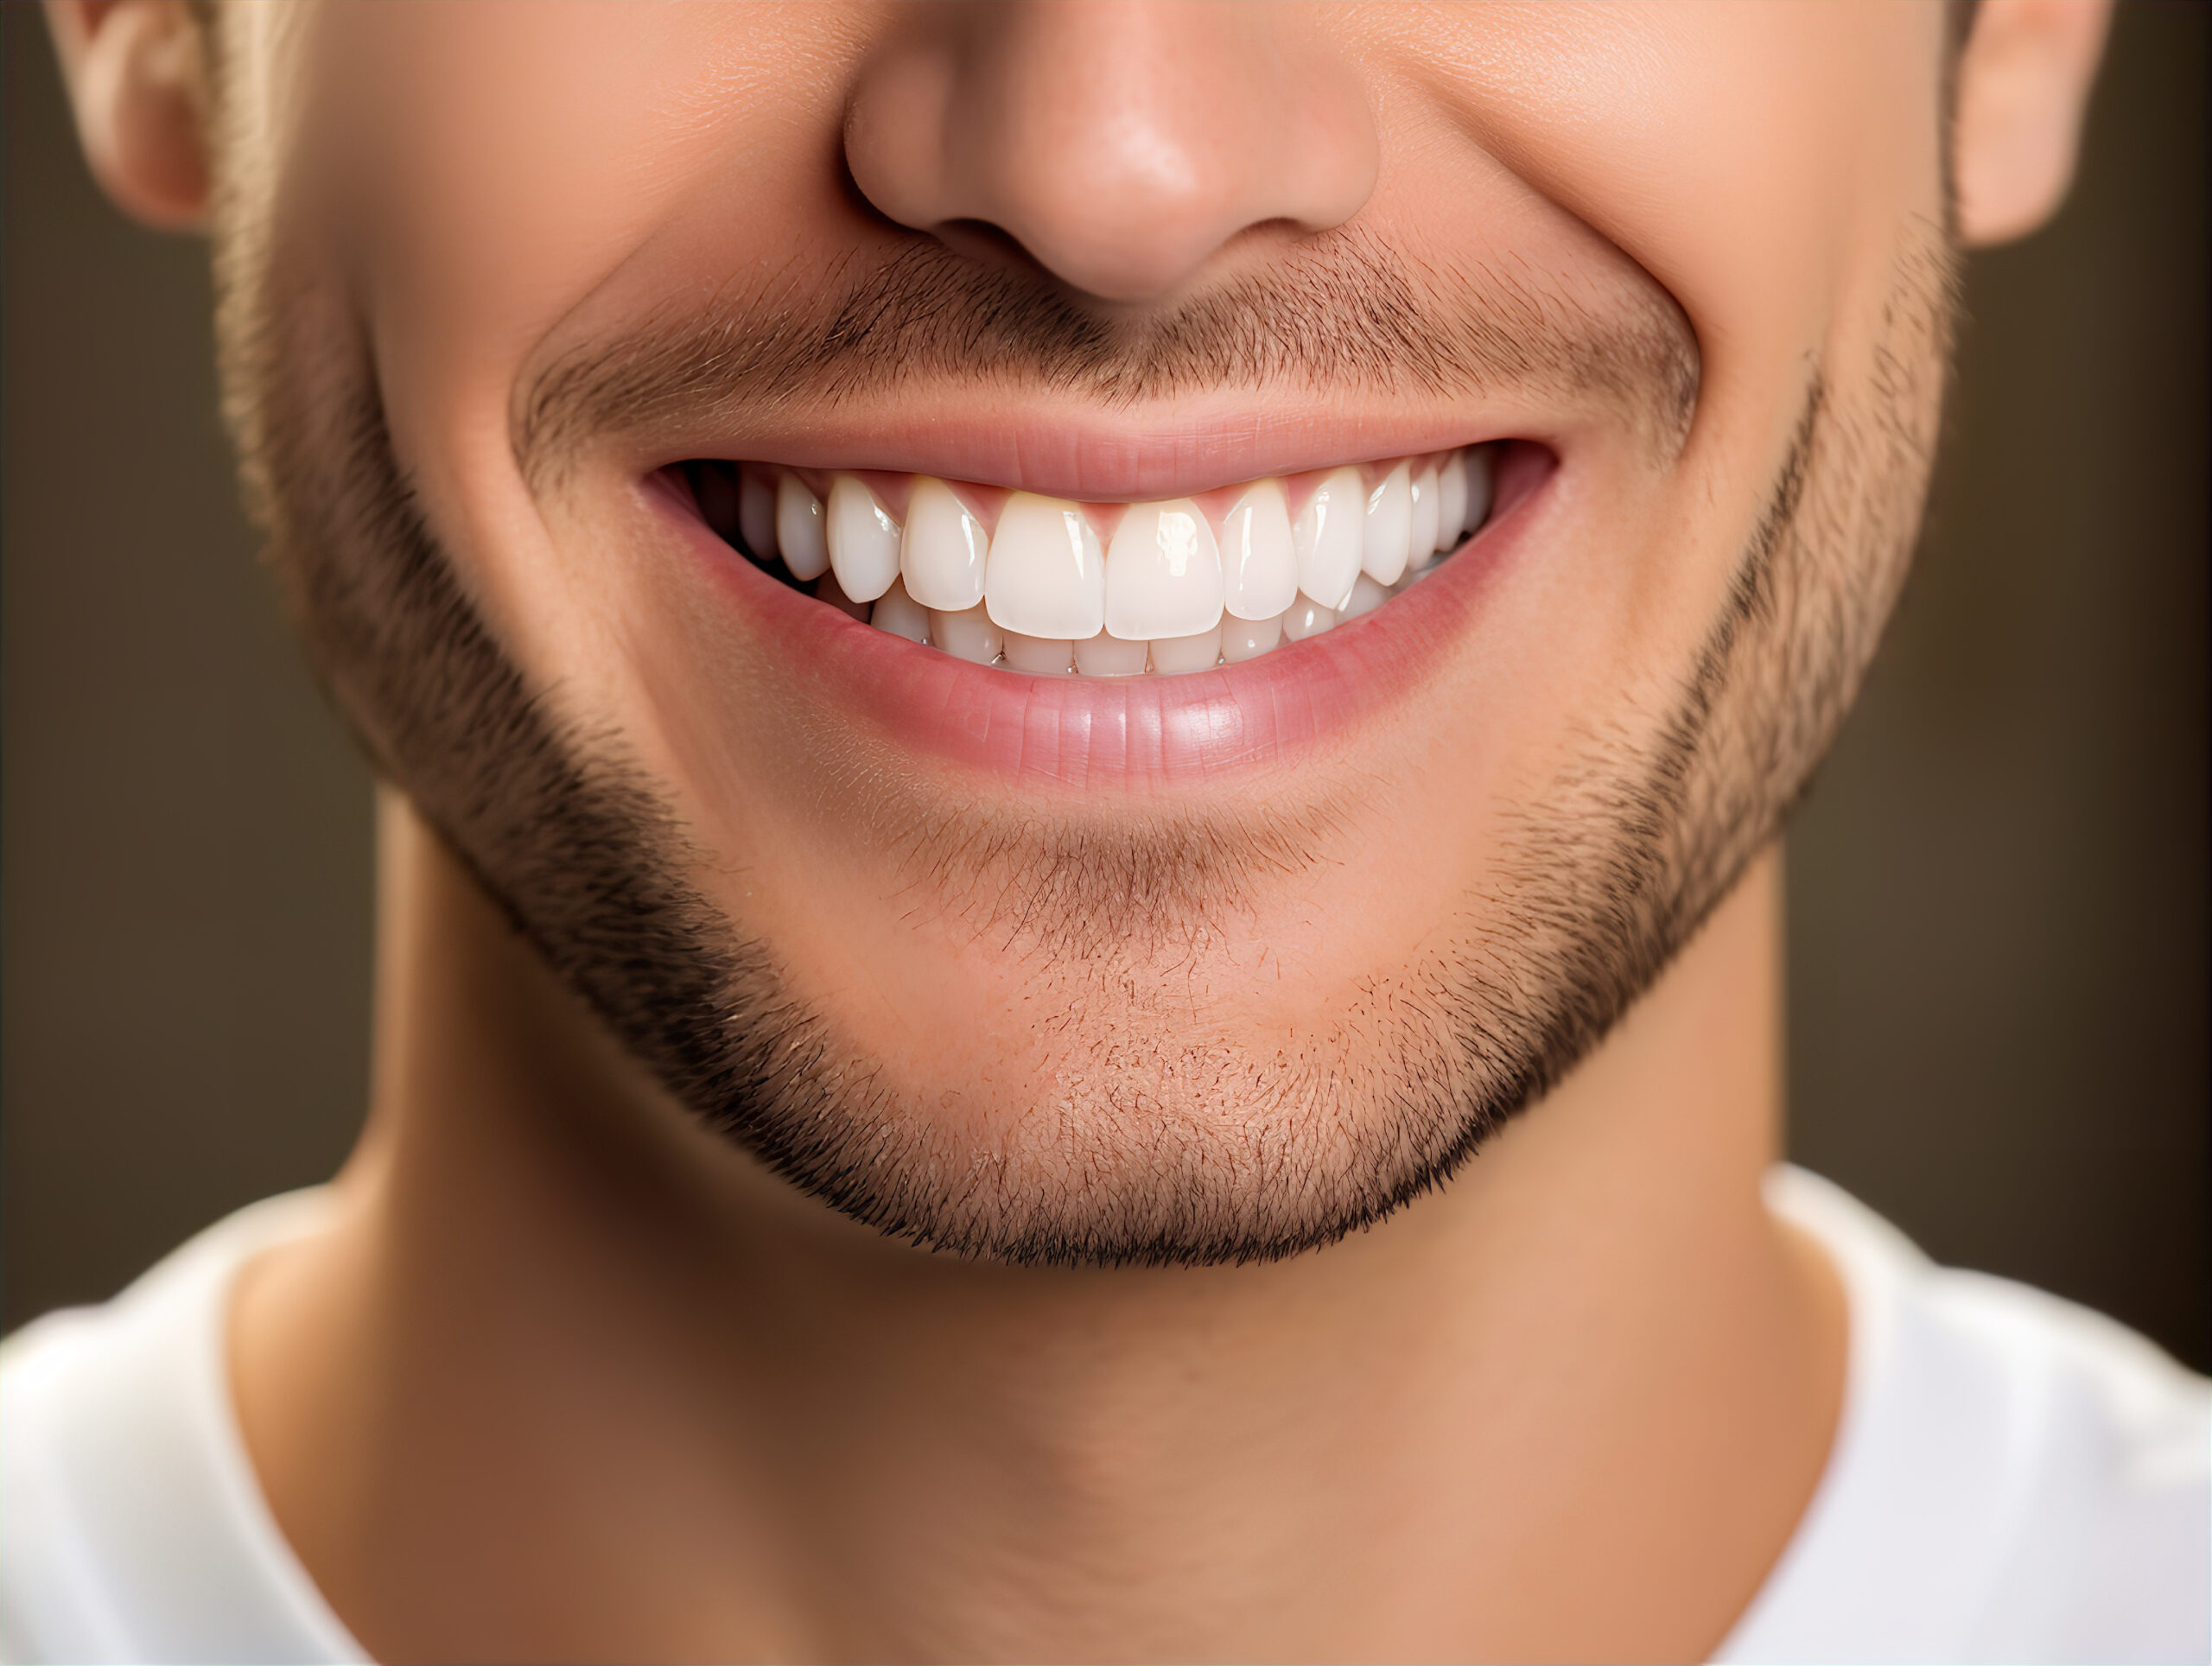 image of a man smiling after a full mouth reconstruction treatment at in a day dental implant center.